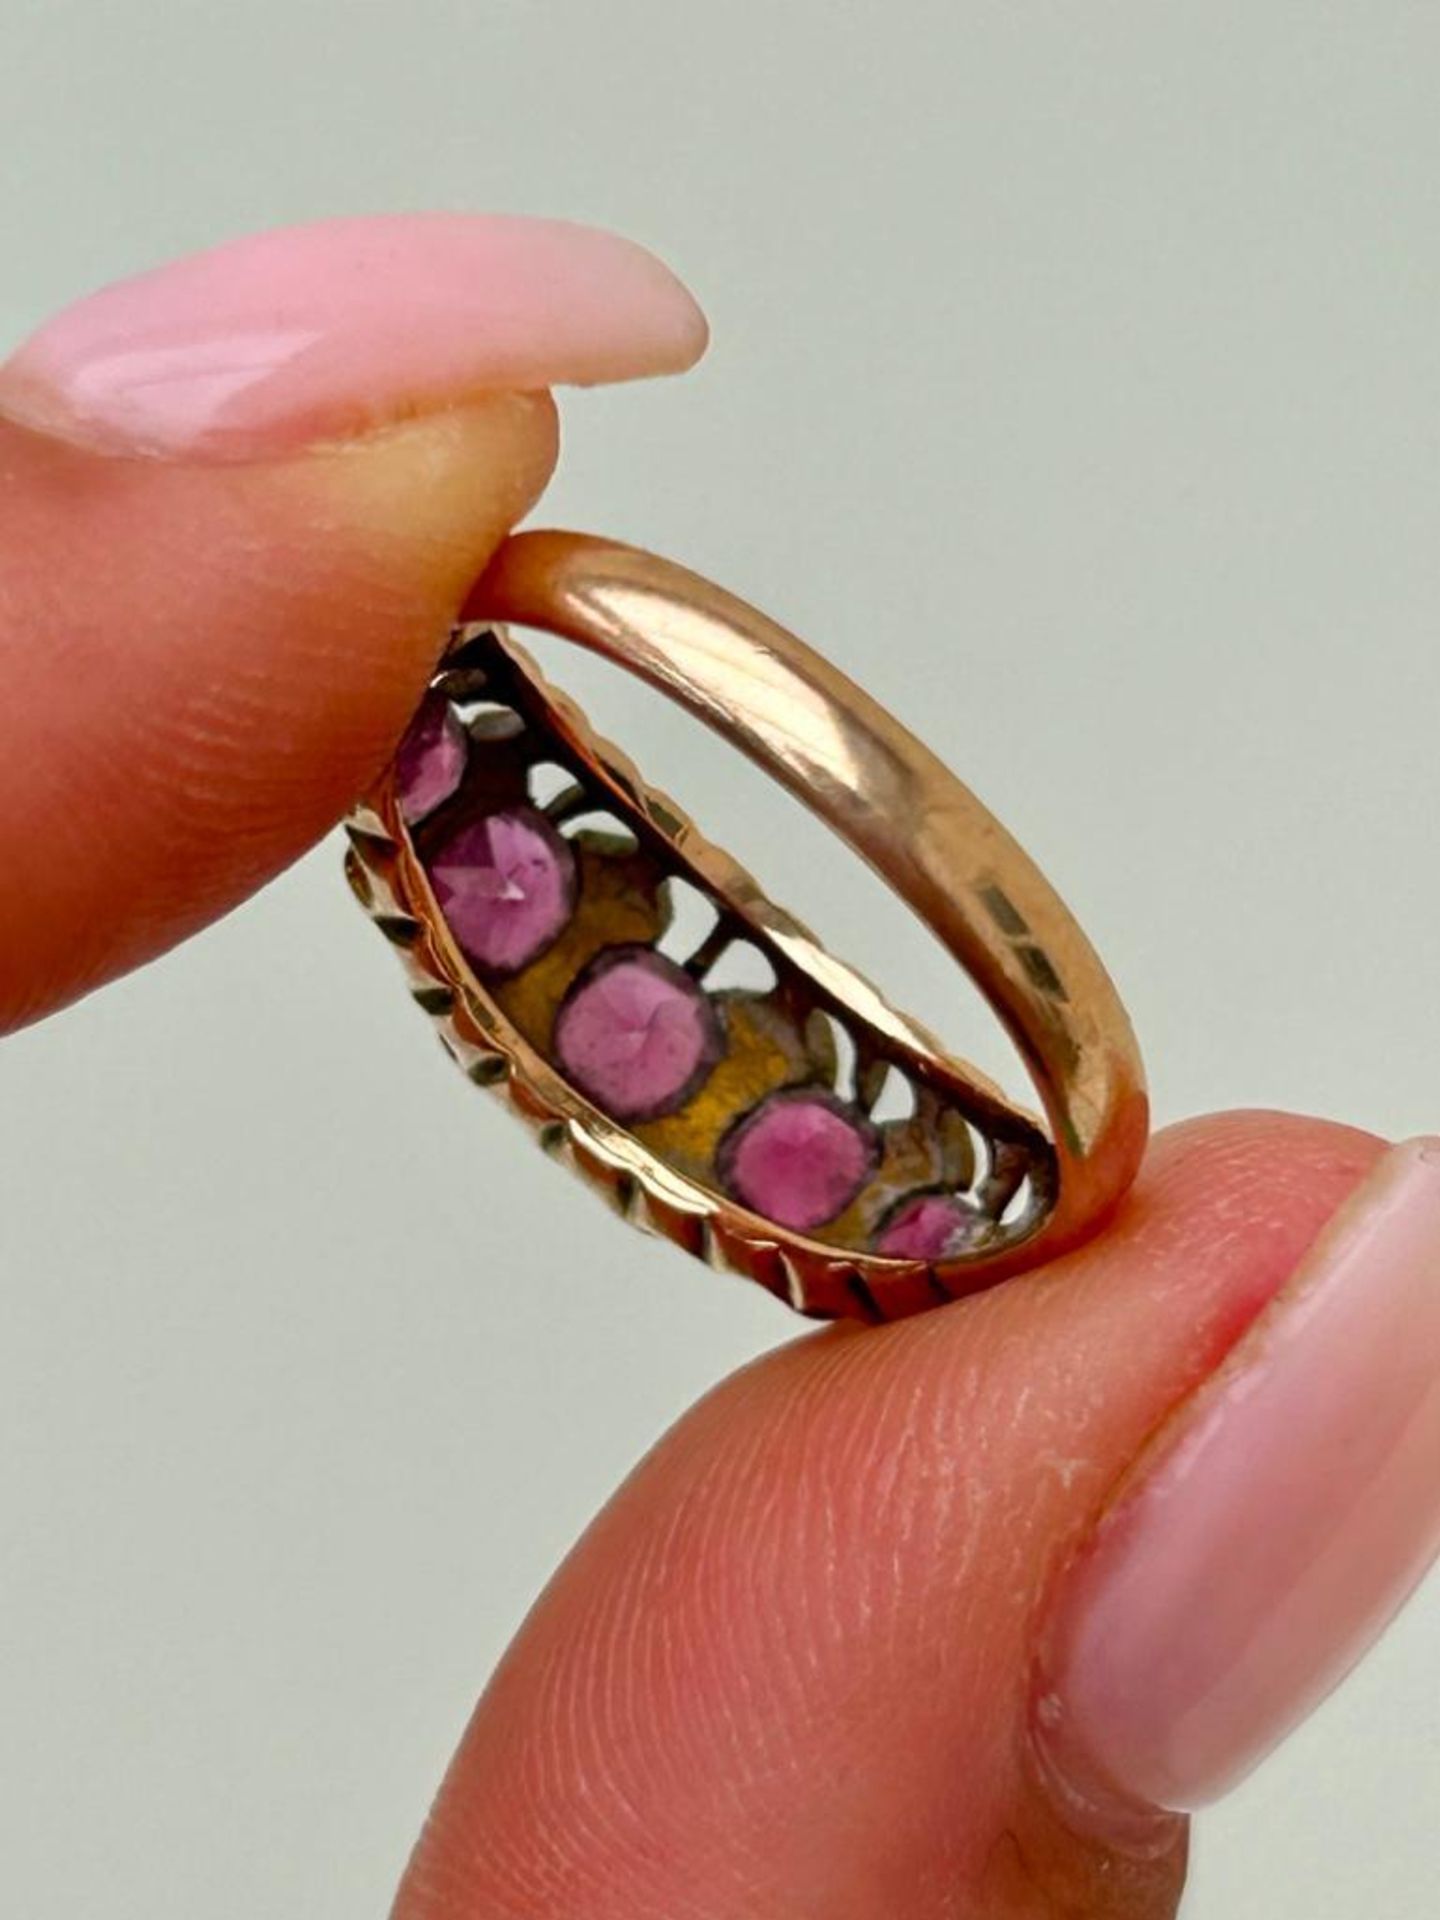 Antique 9ct Gold Ring with Pearl Spacers - Image 6 of 7